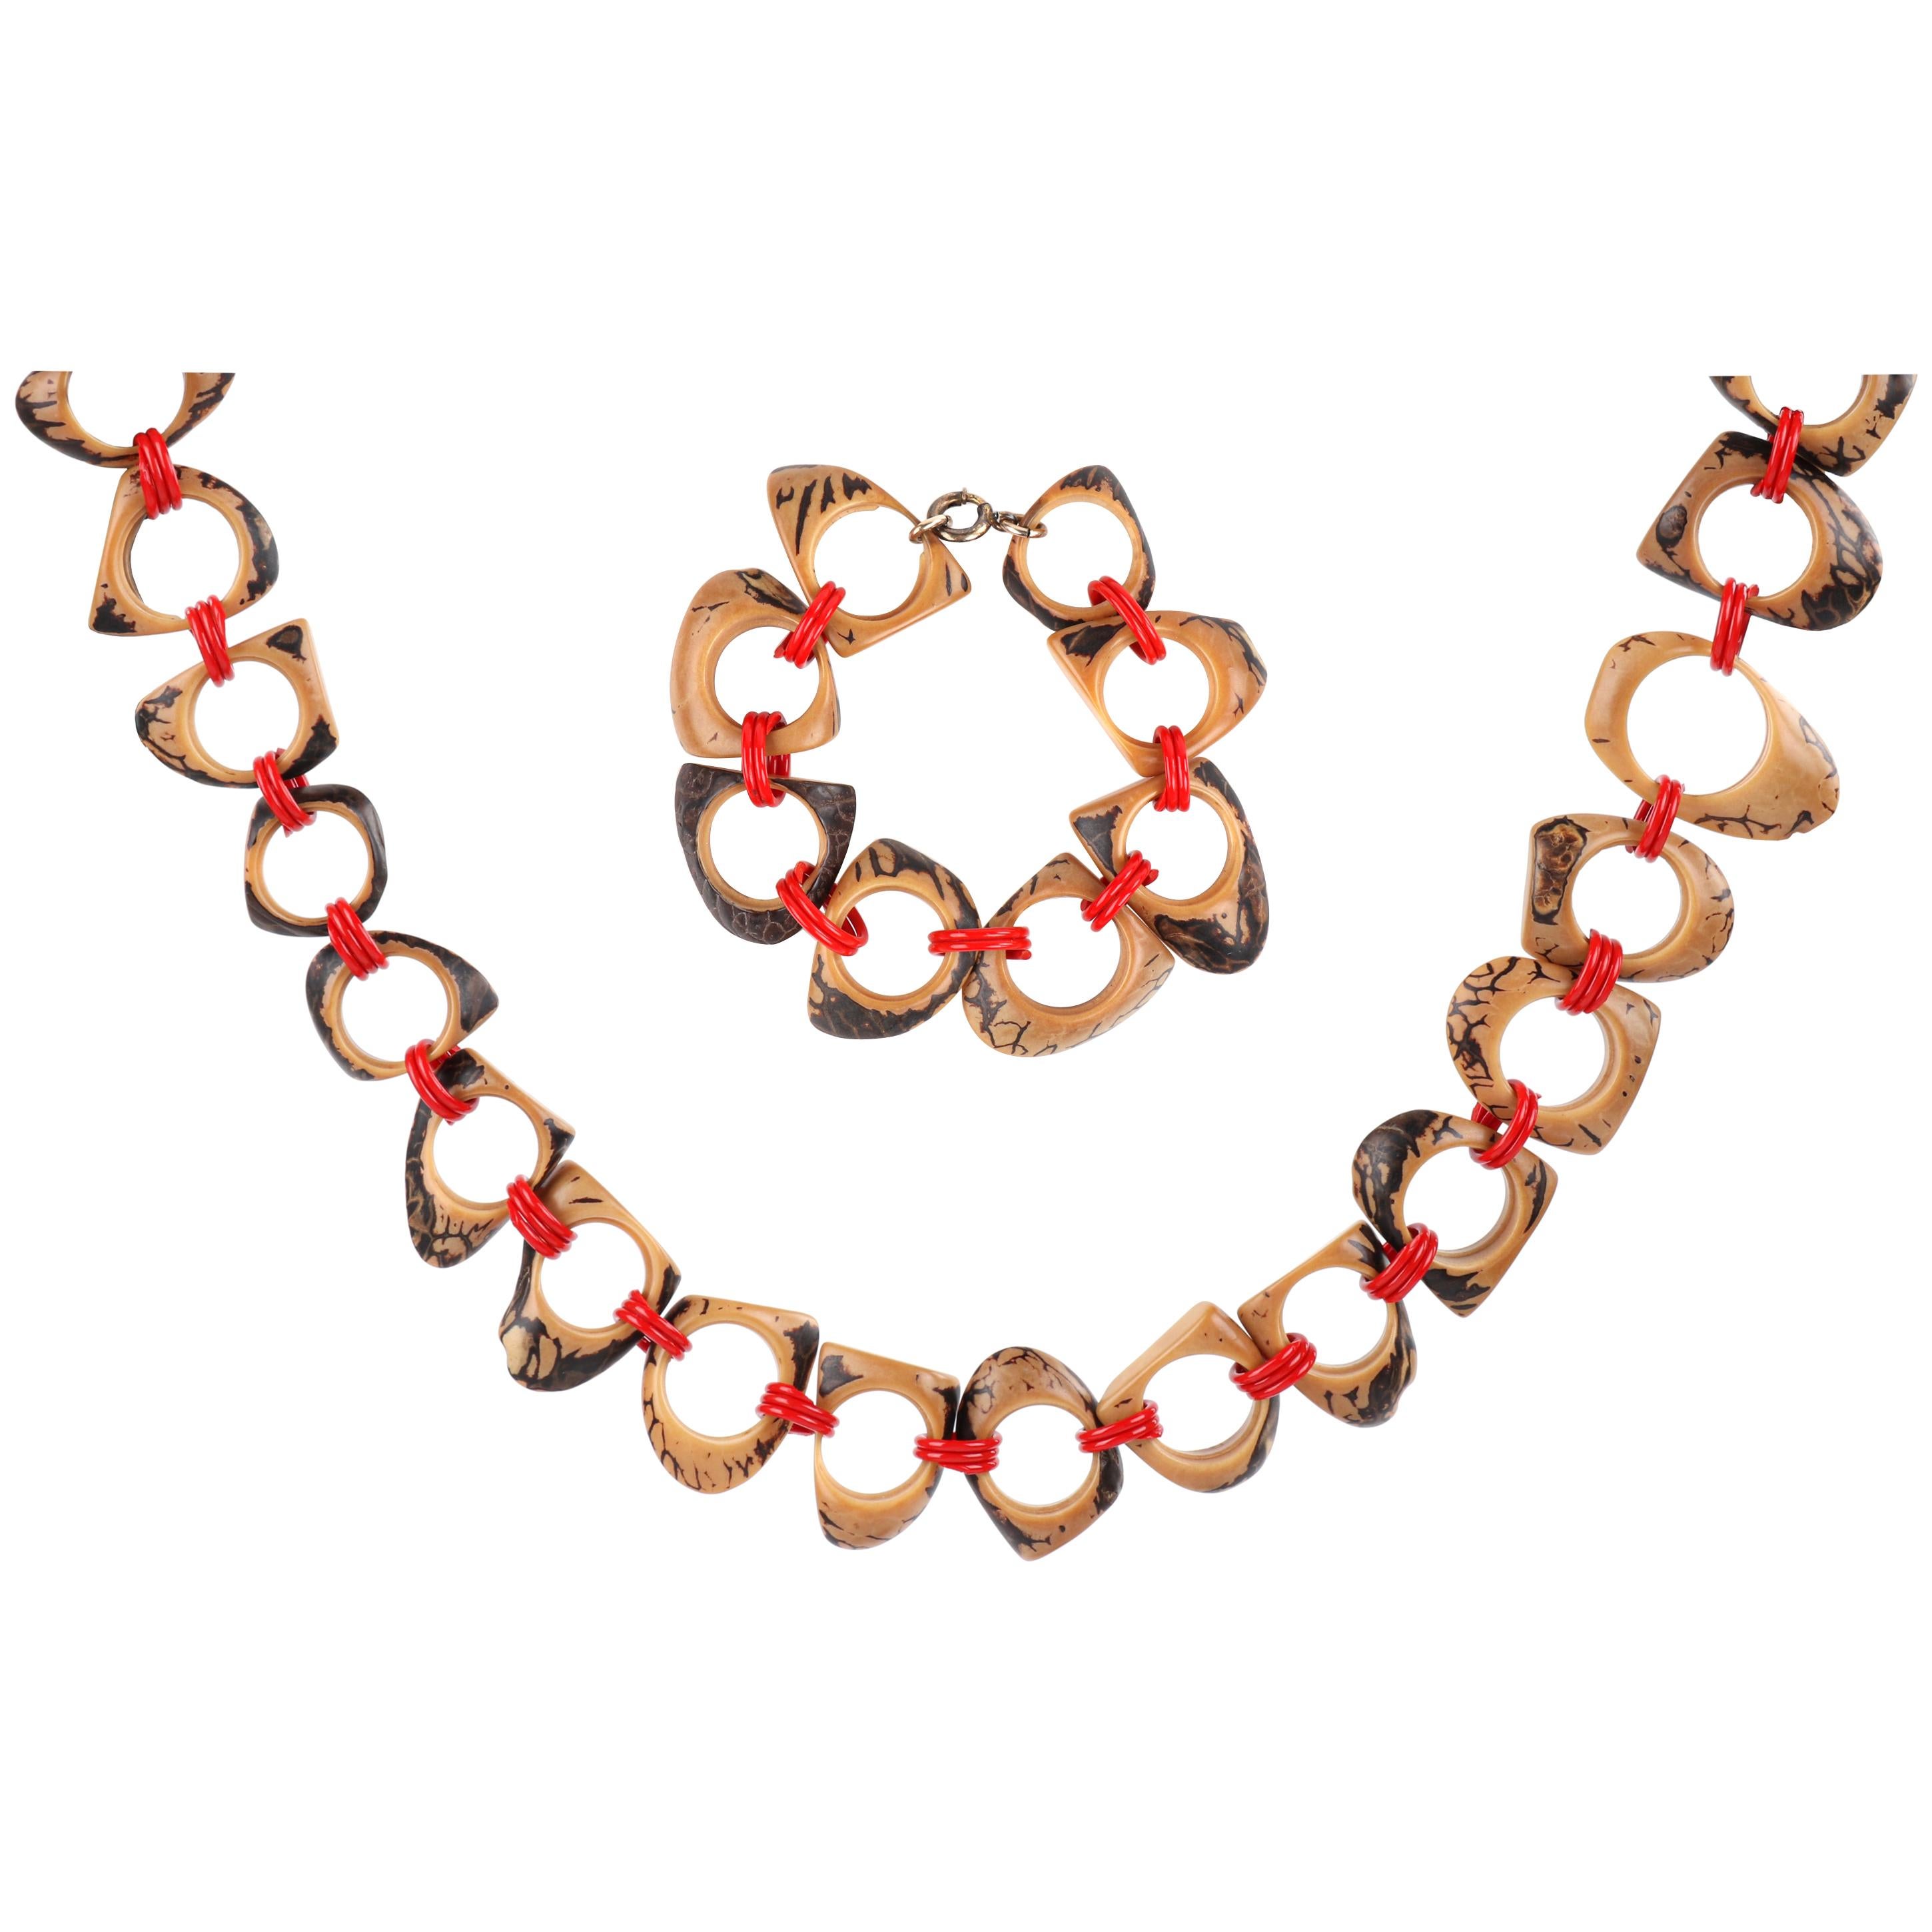 c.1940s-1950s Abstract Sculpted Carved Wood Plastic Chain Necklace Bracelet Set